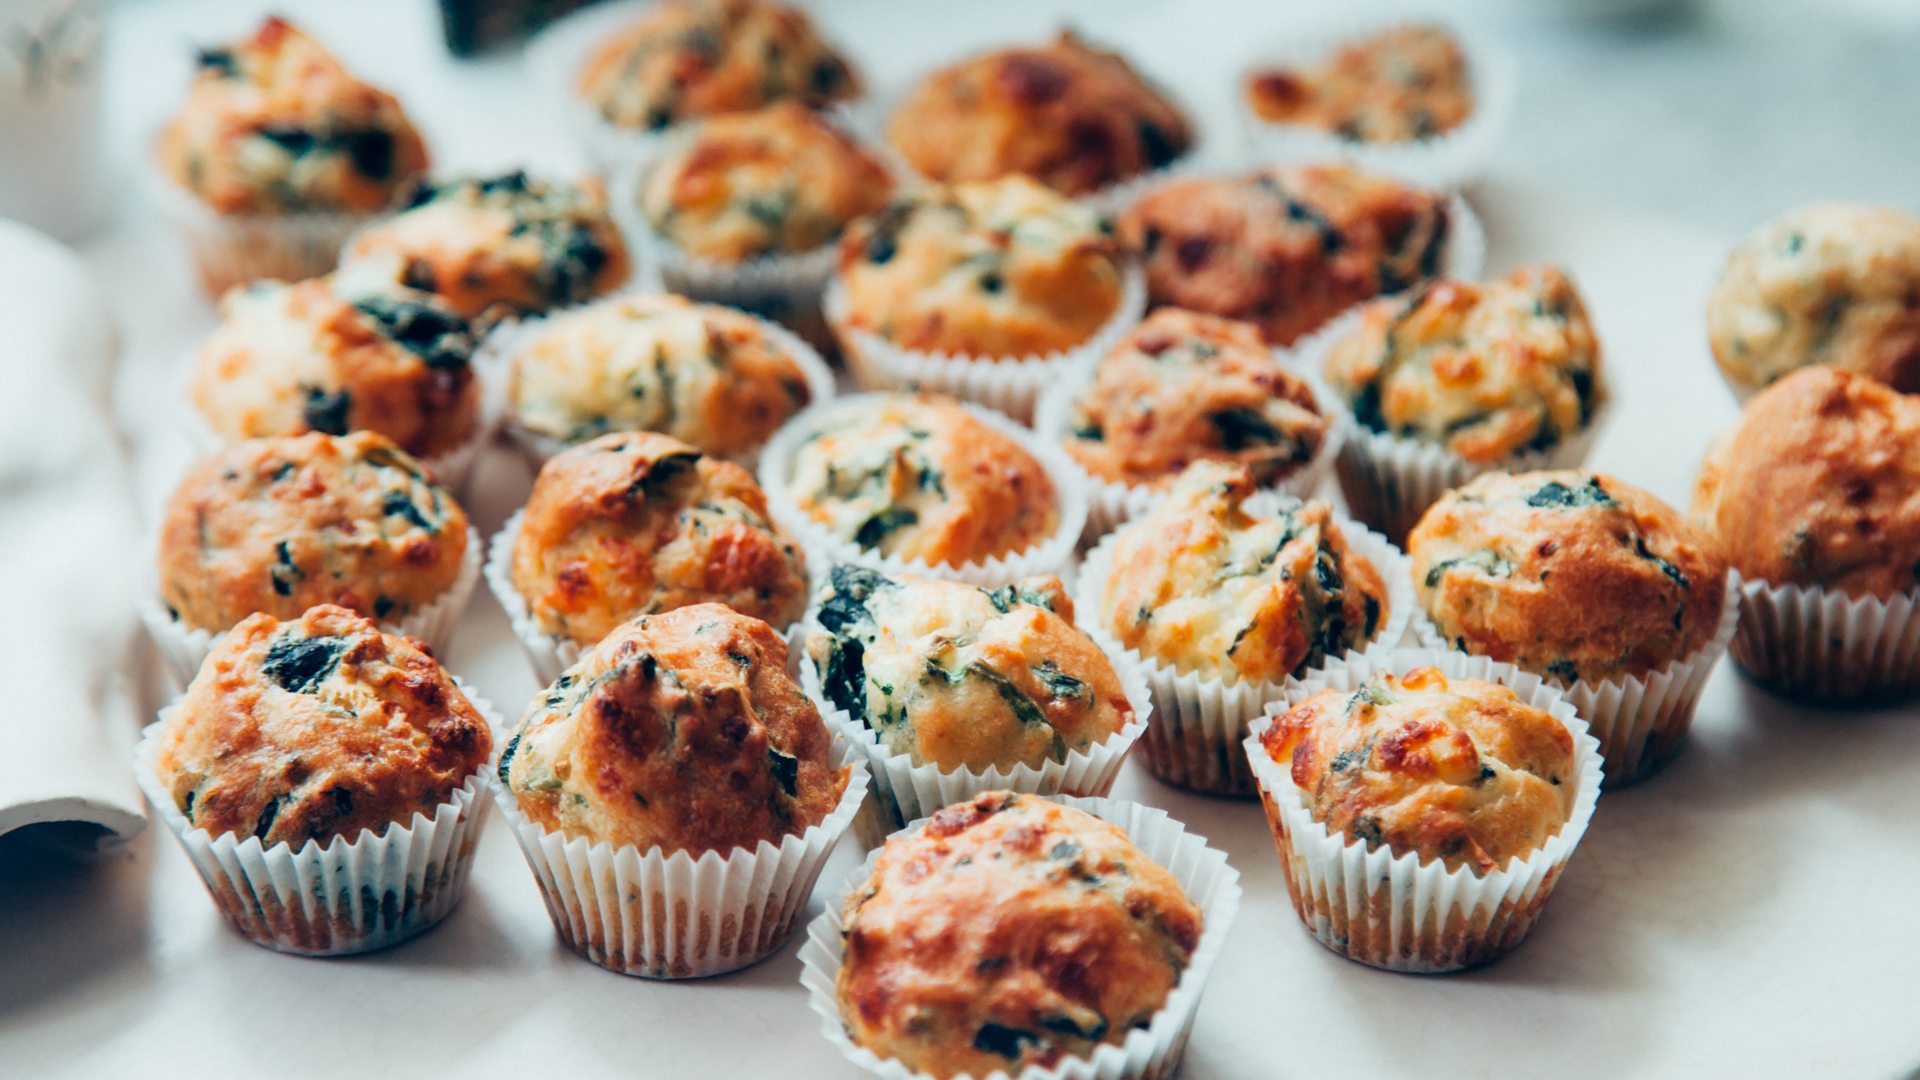 Bake a batch of vegetable and cheese muffins for breakfast on the go